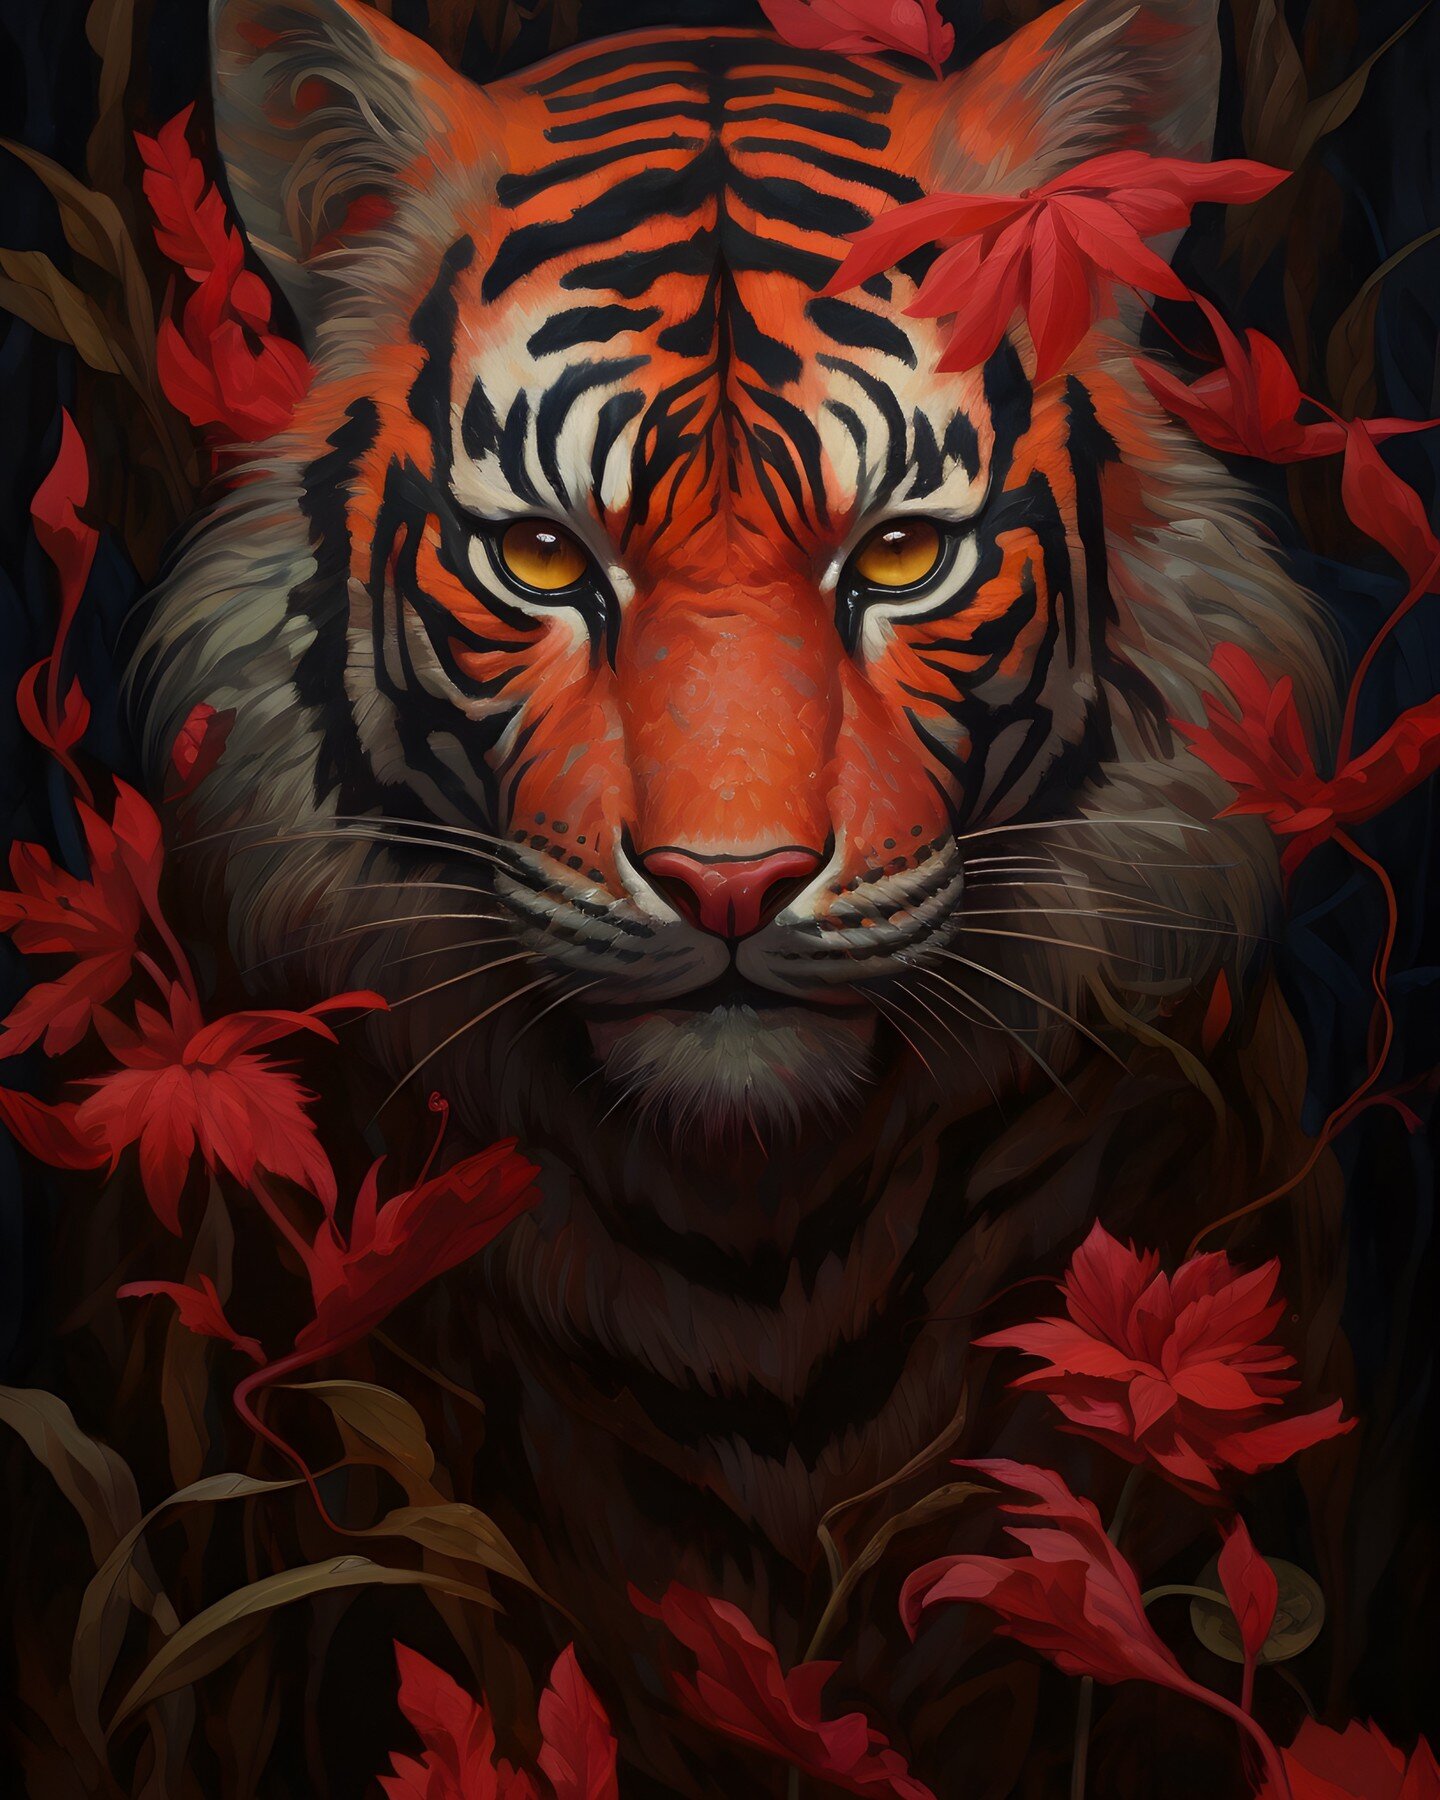 The Bengal 🐯
&mdash;
shop prints : https://dop.darkroom.com/products/1174115
&mdash;  #aiart #midjourney #aiartcommunity #generativefill #posters #design #designmidjourney #aidesign #bengal #tiger